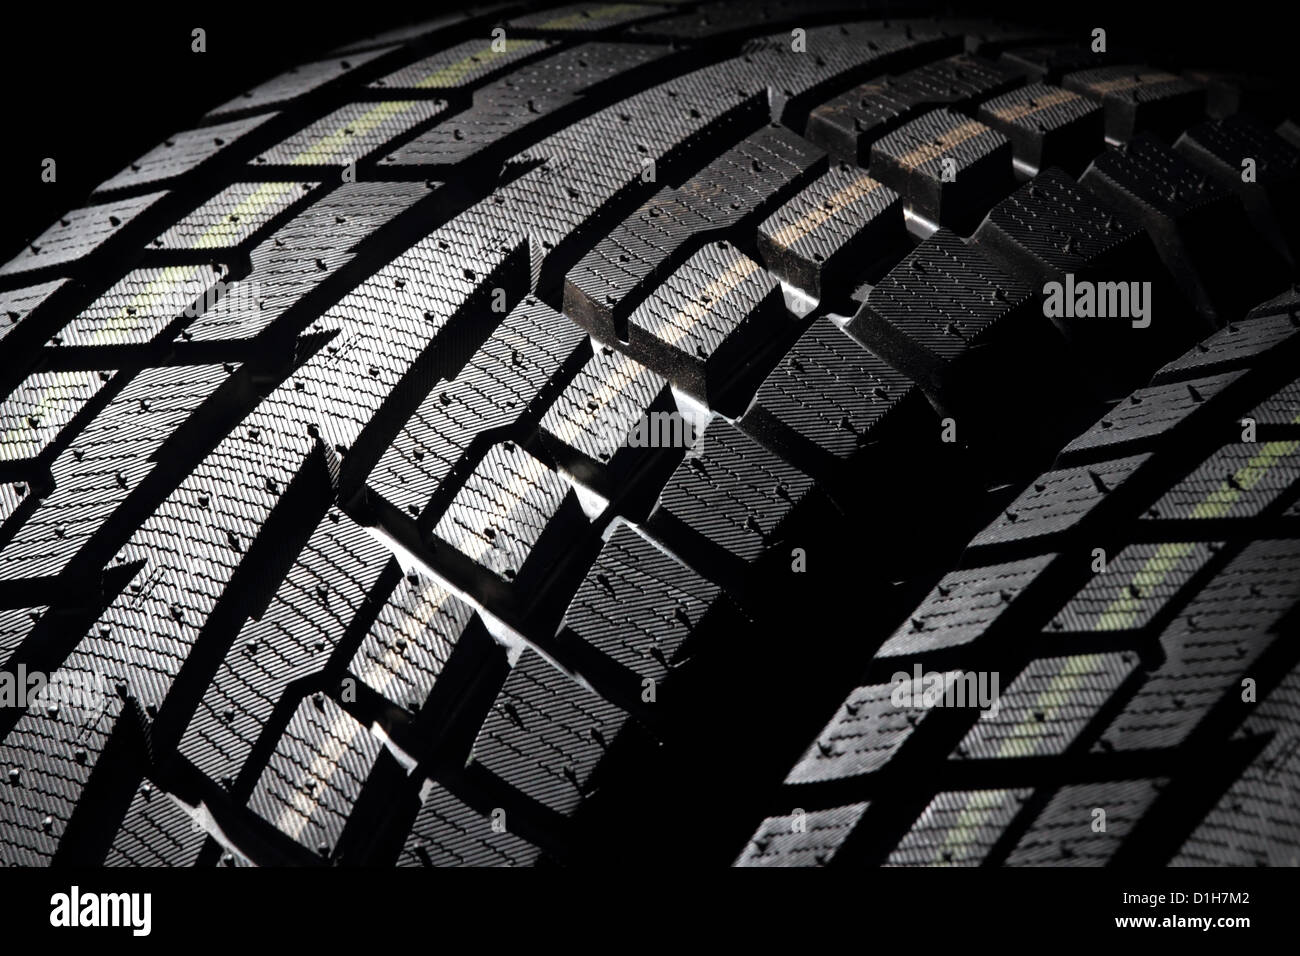 winter Alamy New photography images and hi-res tyres stock -